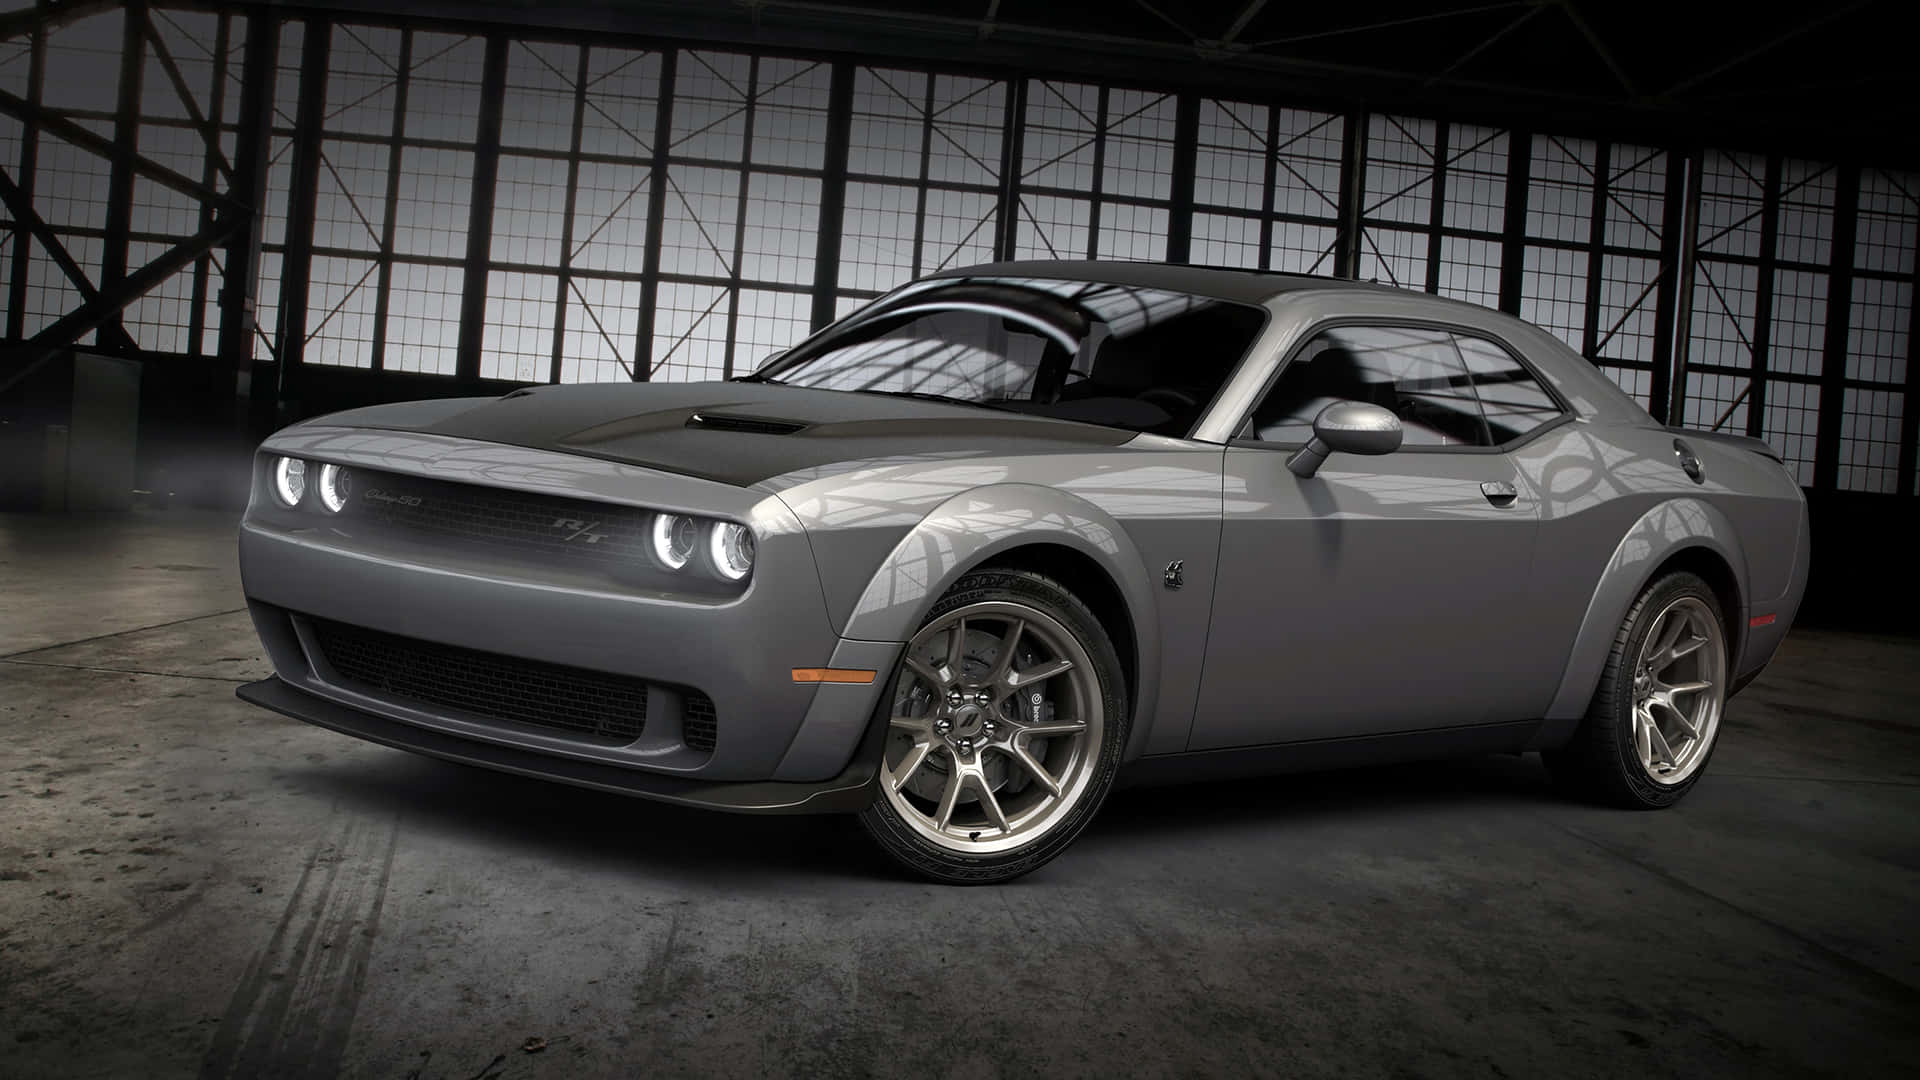 Get ready to experience a powerful thrill ride with the Dodge Scat Pack Wallpaper